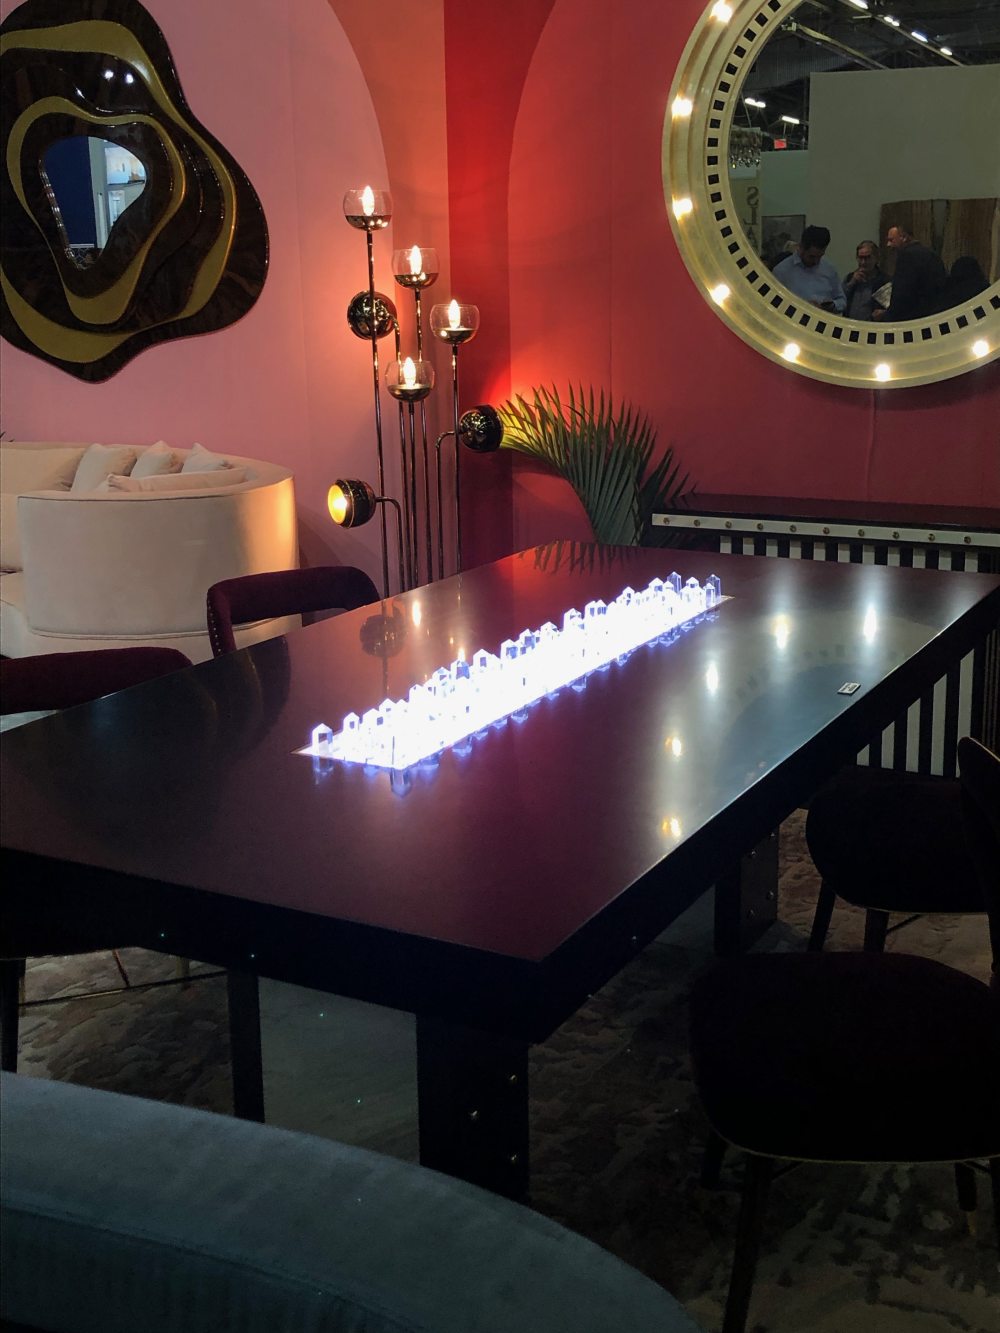 Black table with a cool led light design on top